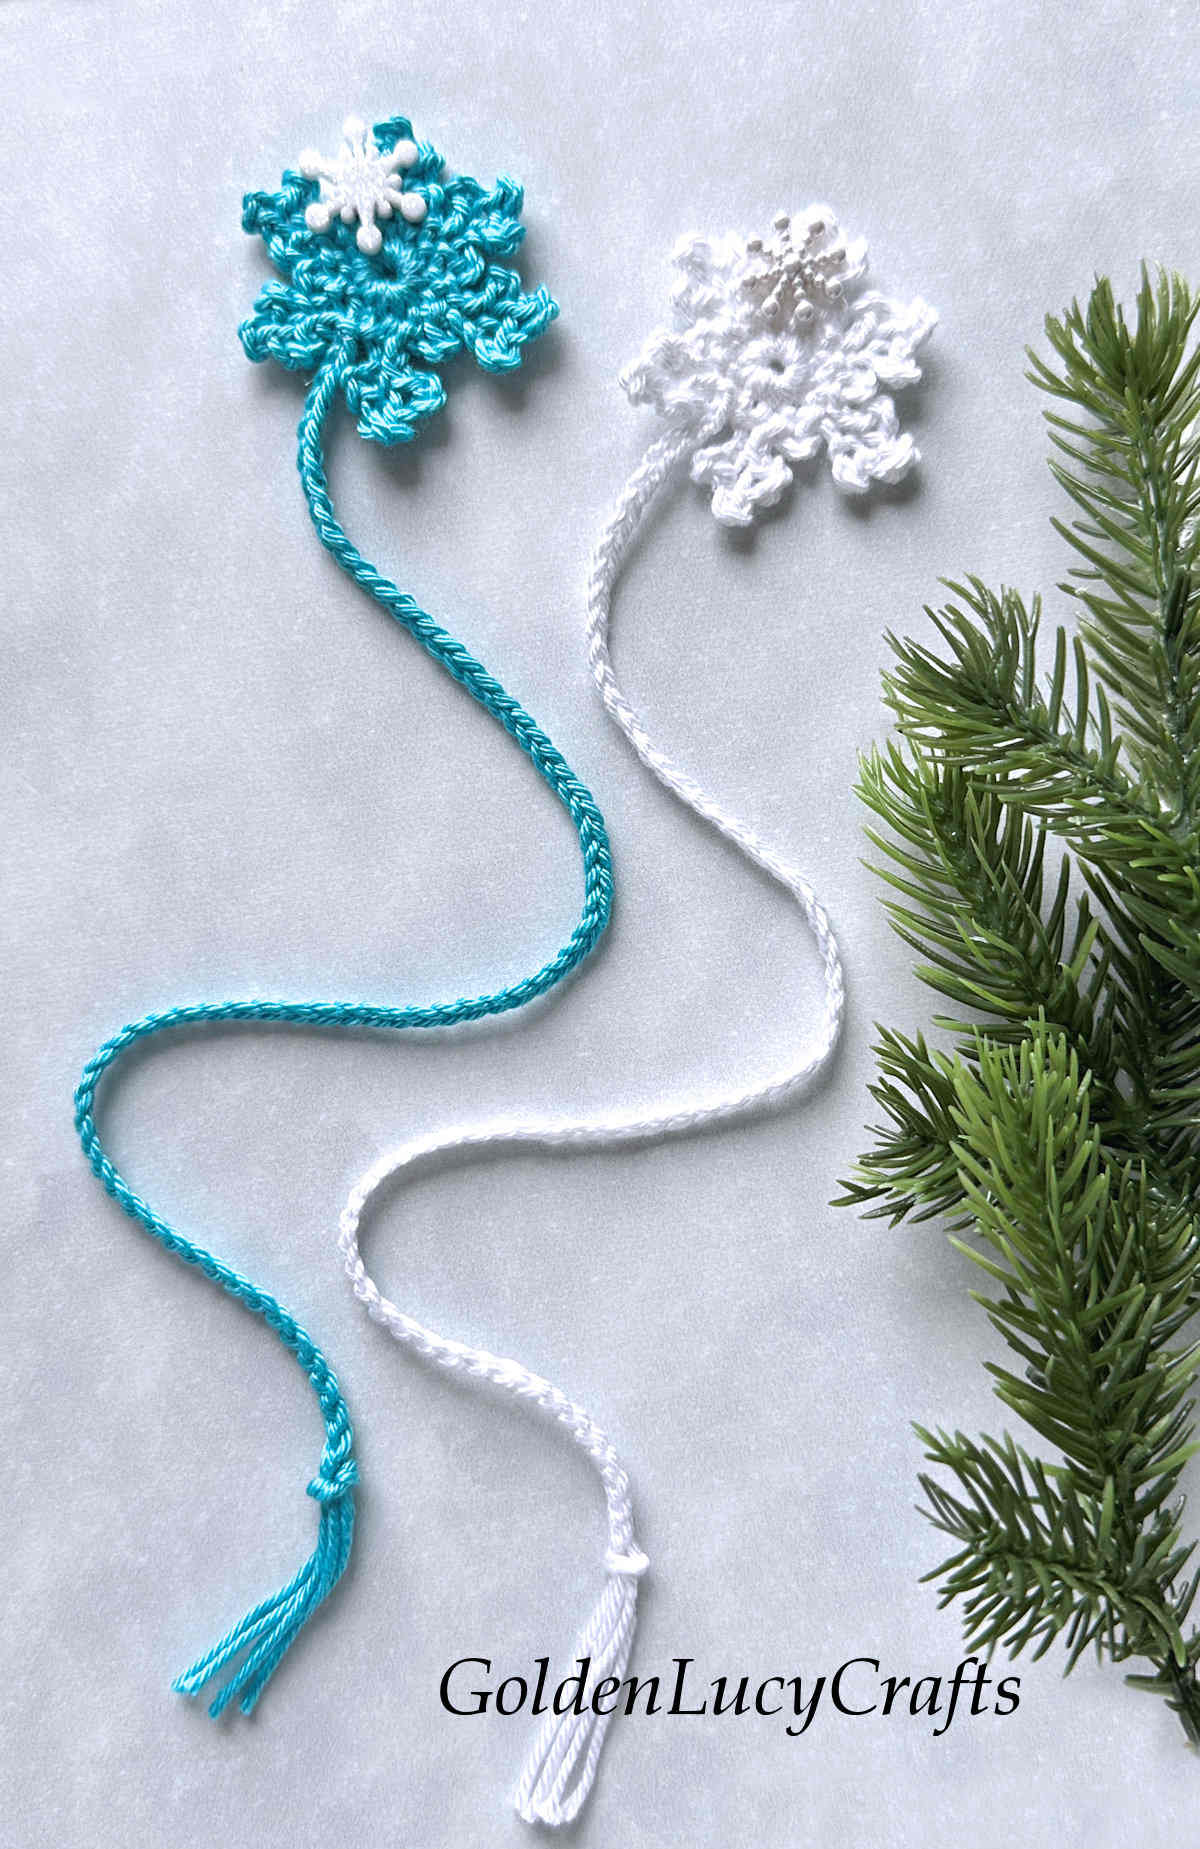 Crochet turquoise and white snowflake bookmarks.